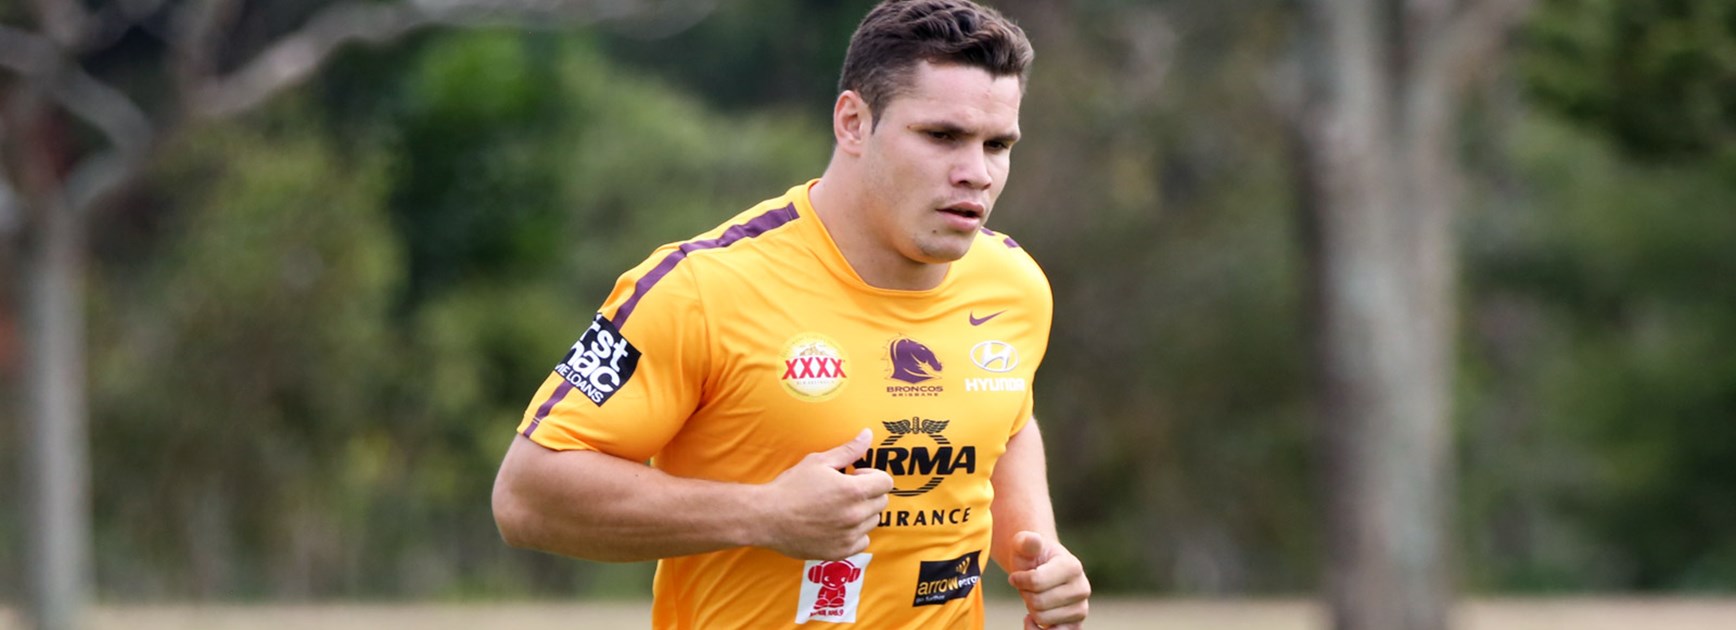 Brisbane Broncos recruit James Roberts in his first day at training at Red Hill.